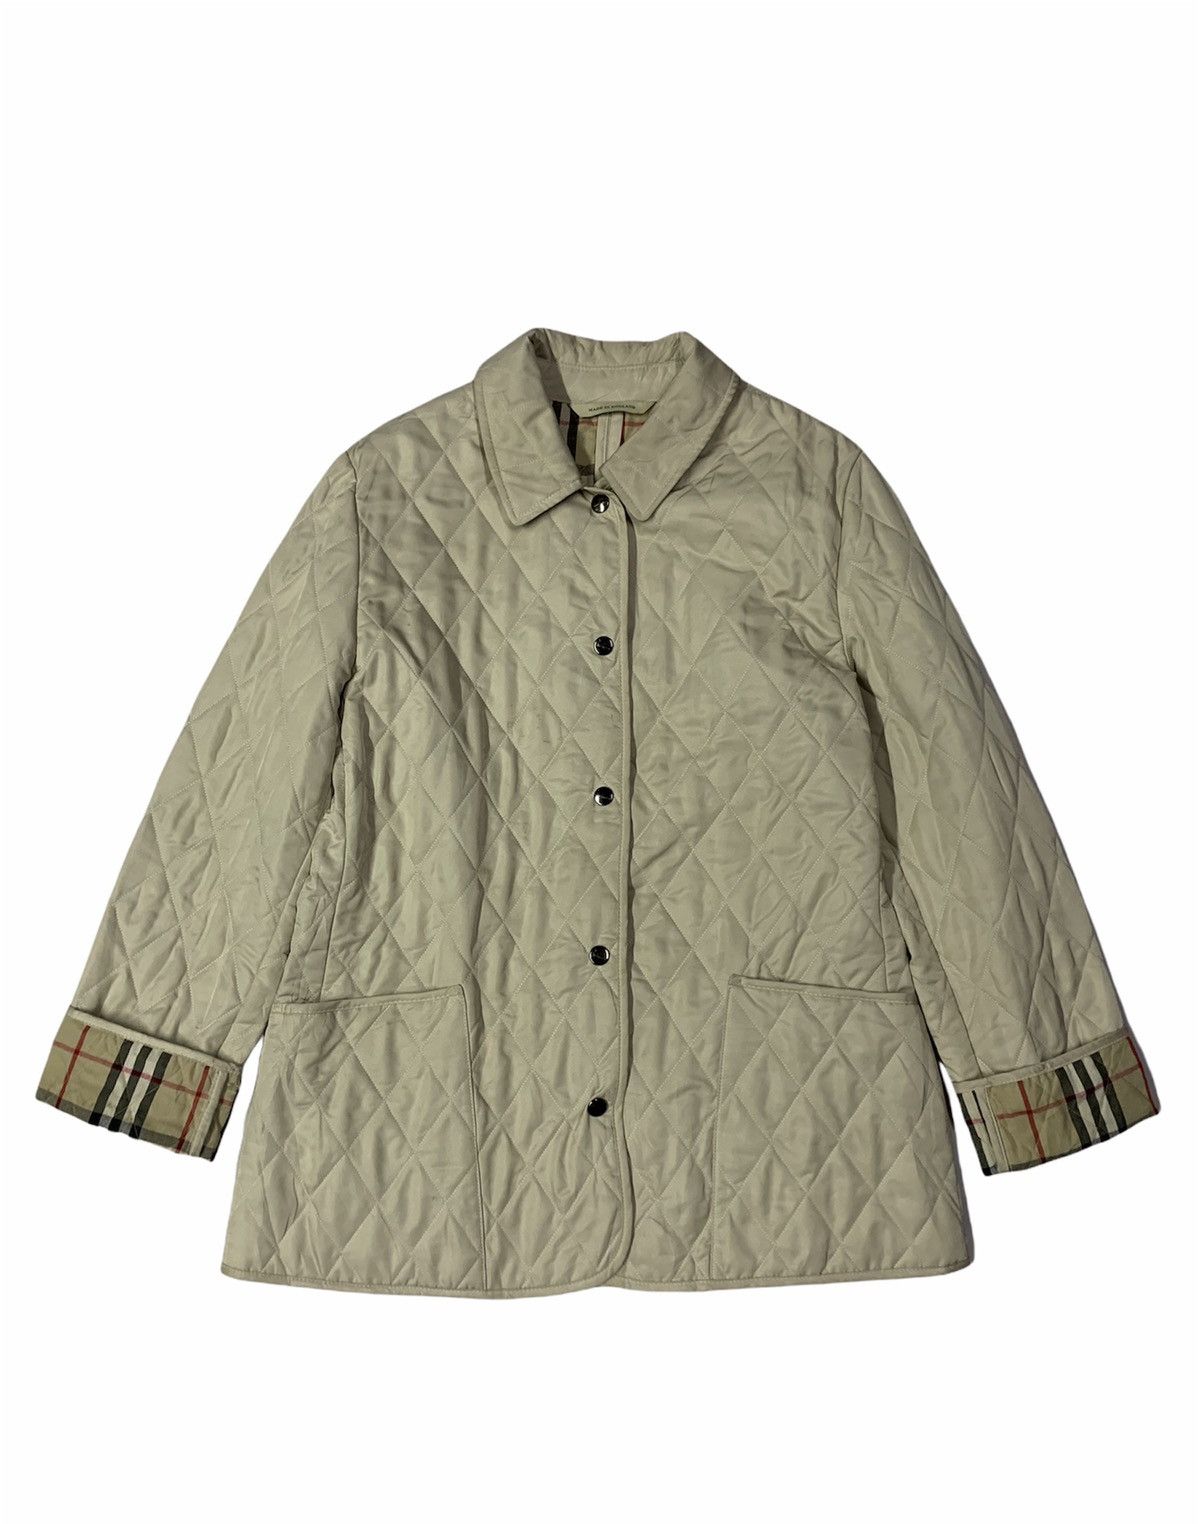 🔥BURBERRY QUILTED JACKETS NOVACHECK - 3